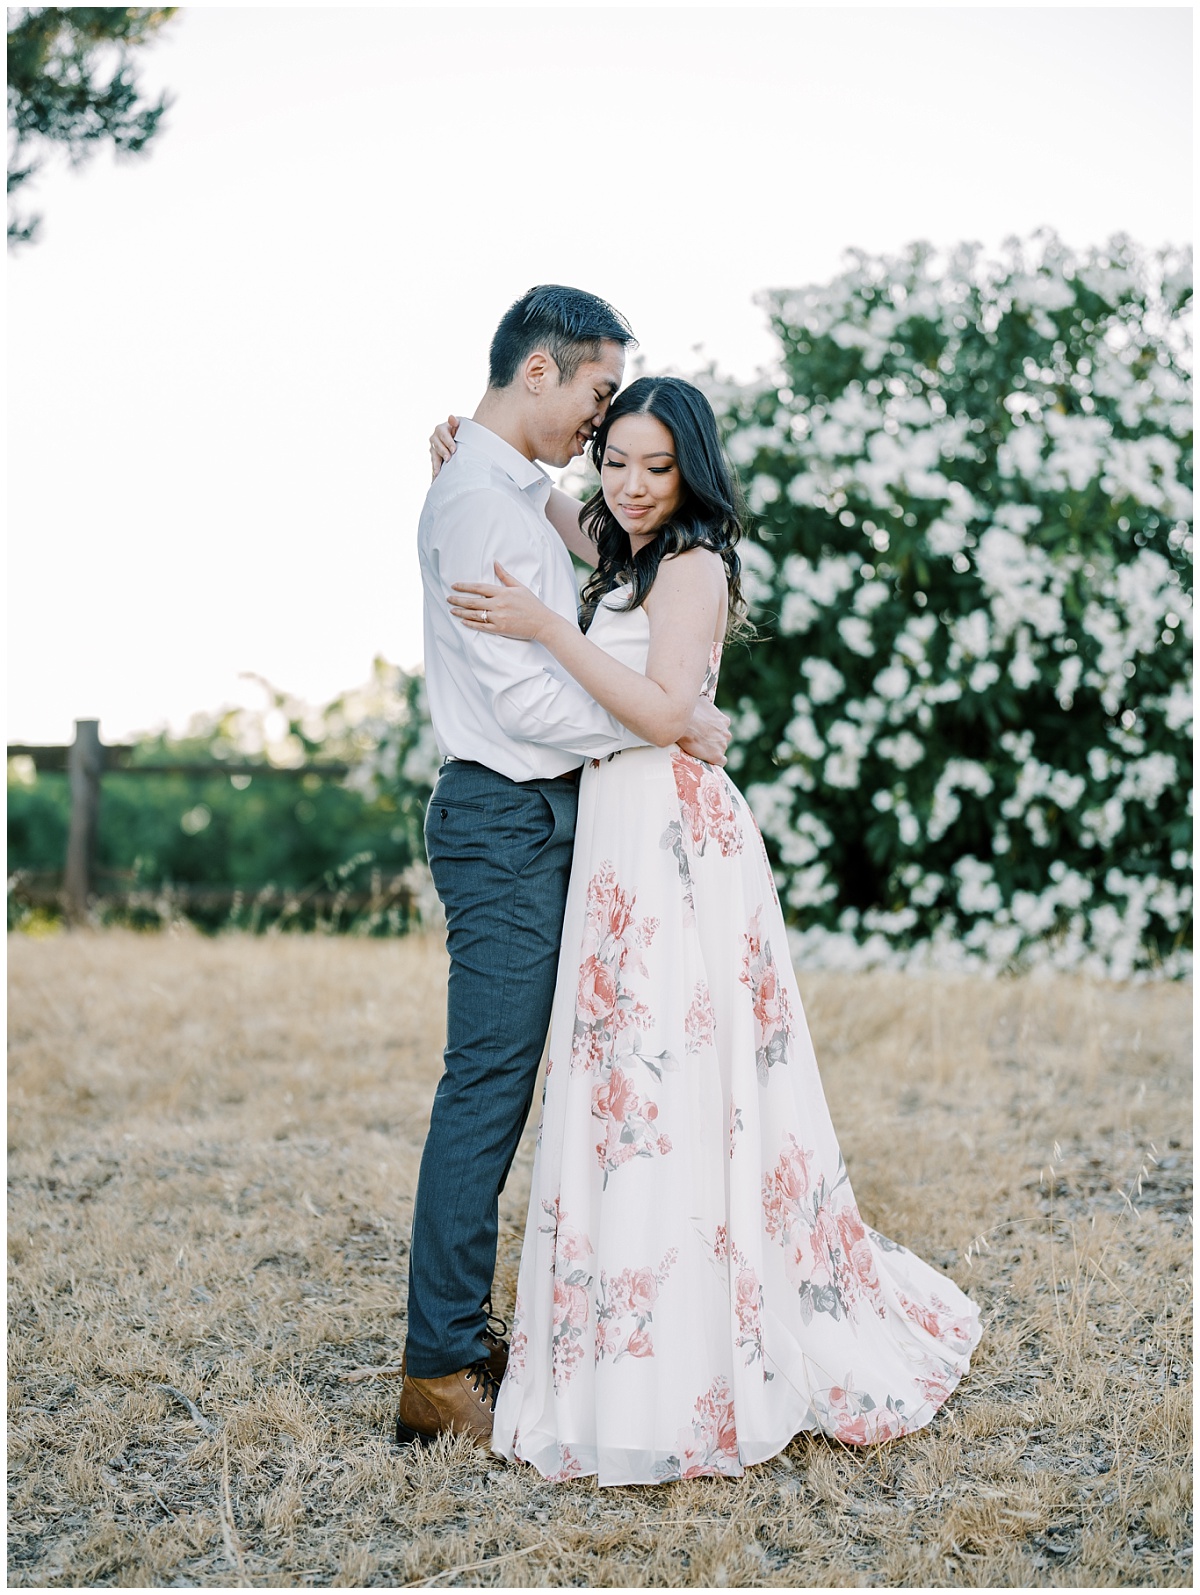 White with Pink Flowers Engagement Dress